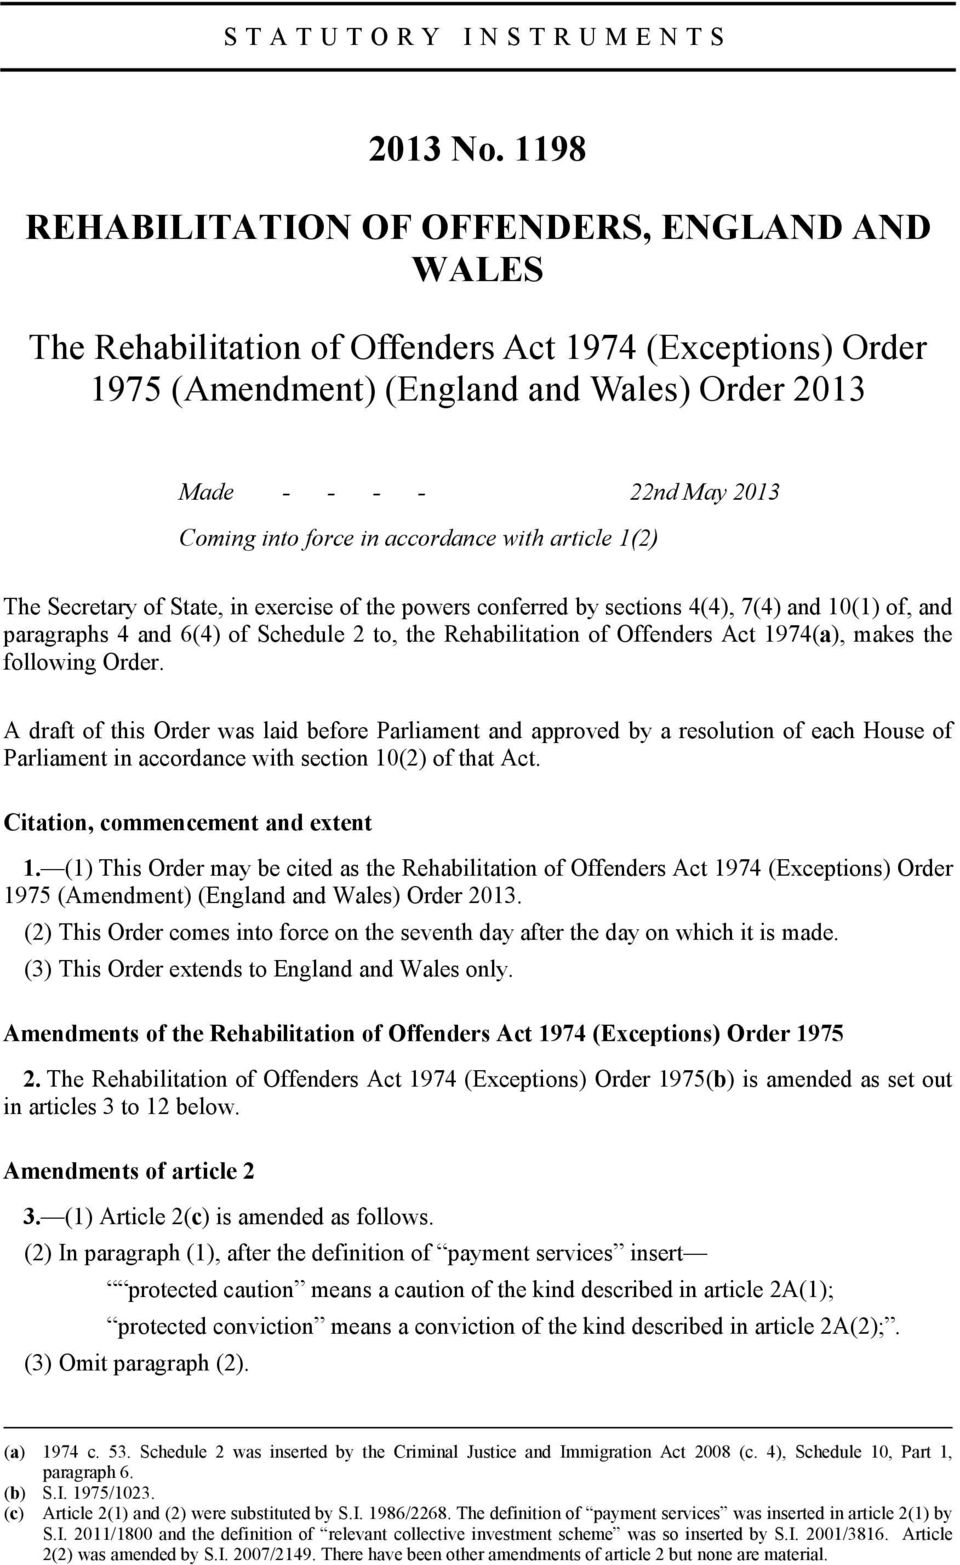 force in accordance with article 1(2) The Secretary of State, in exercise of the powers conferred by sections 4(4), 7(4) and 10(1) of, and paragraphs 4 and 6(4) of Schedule 2 to, the Rehabilitation